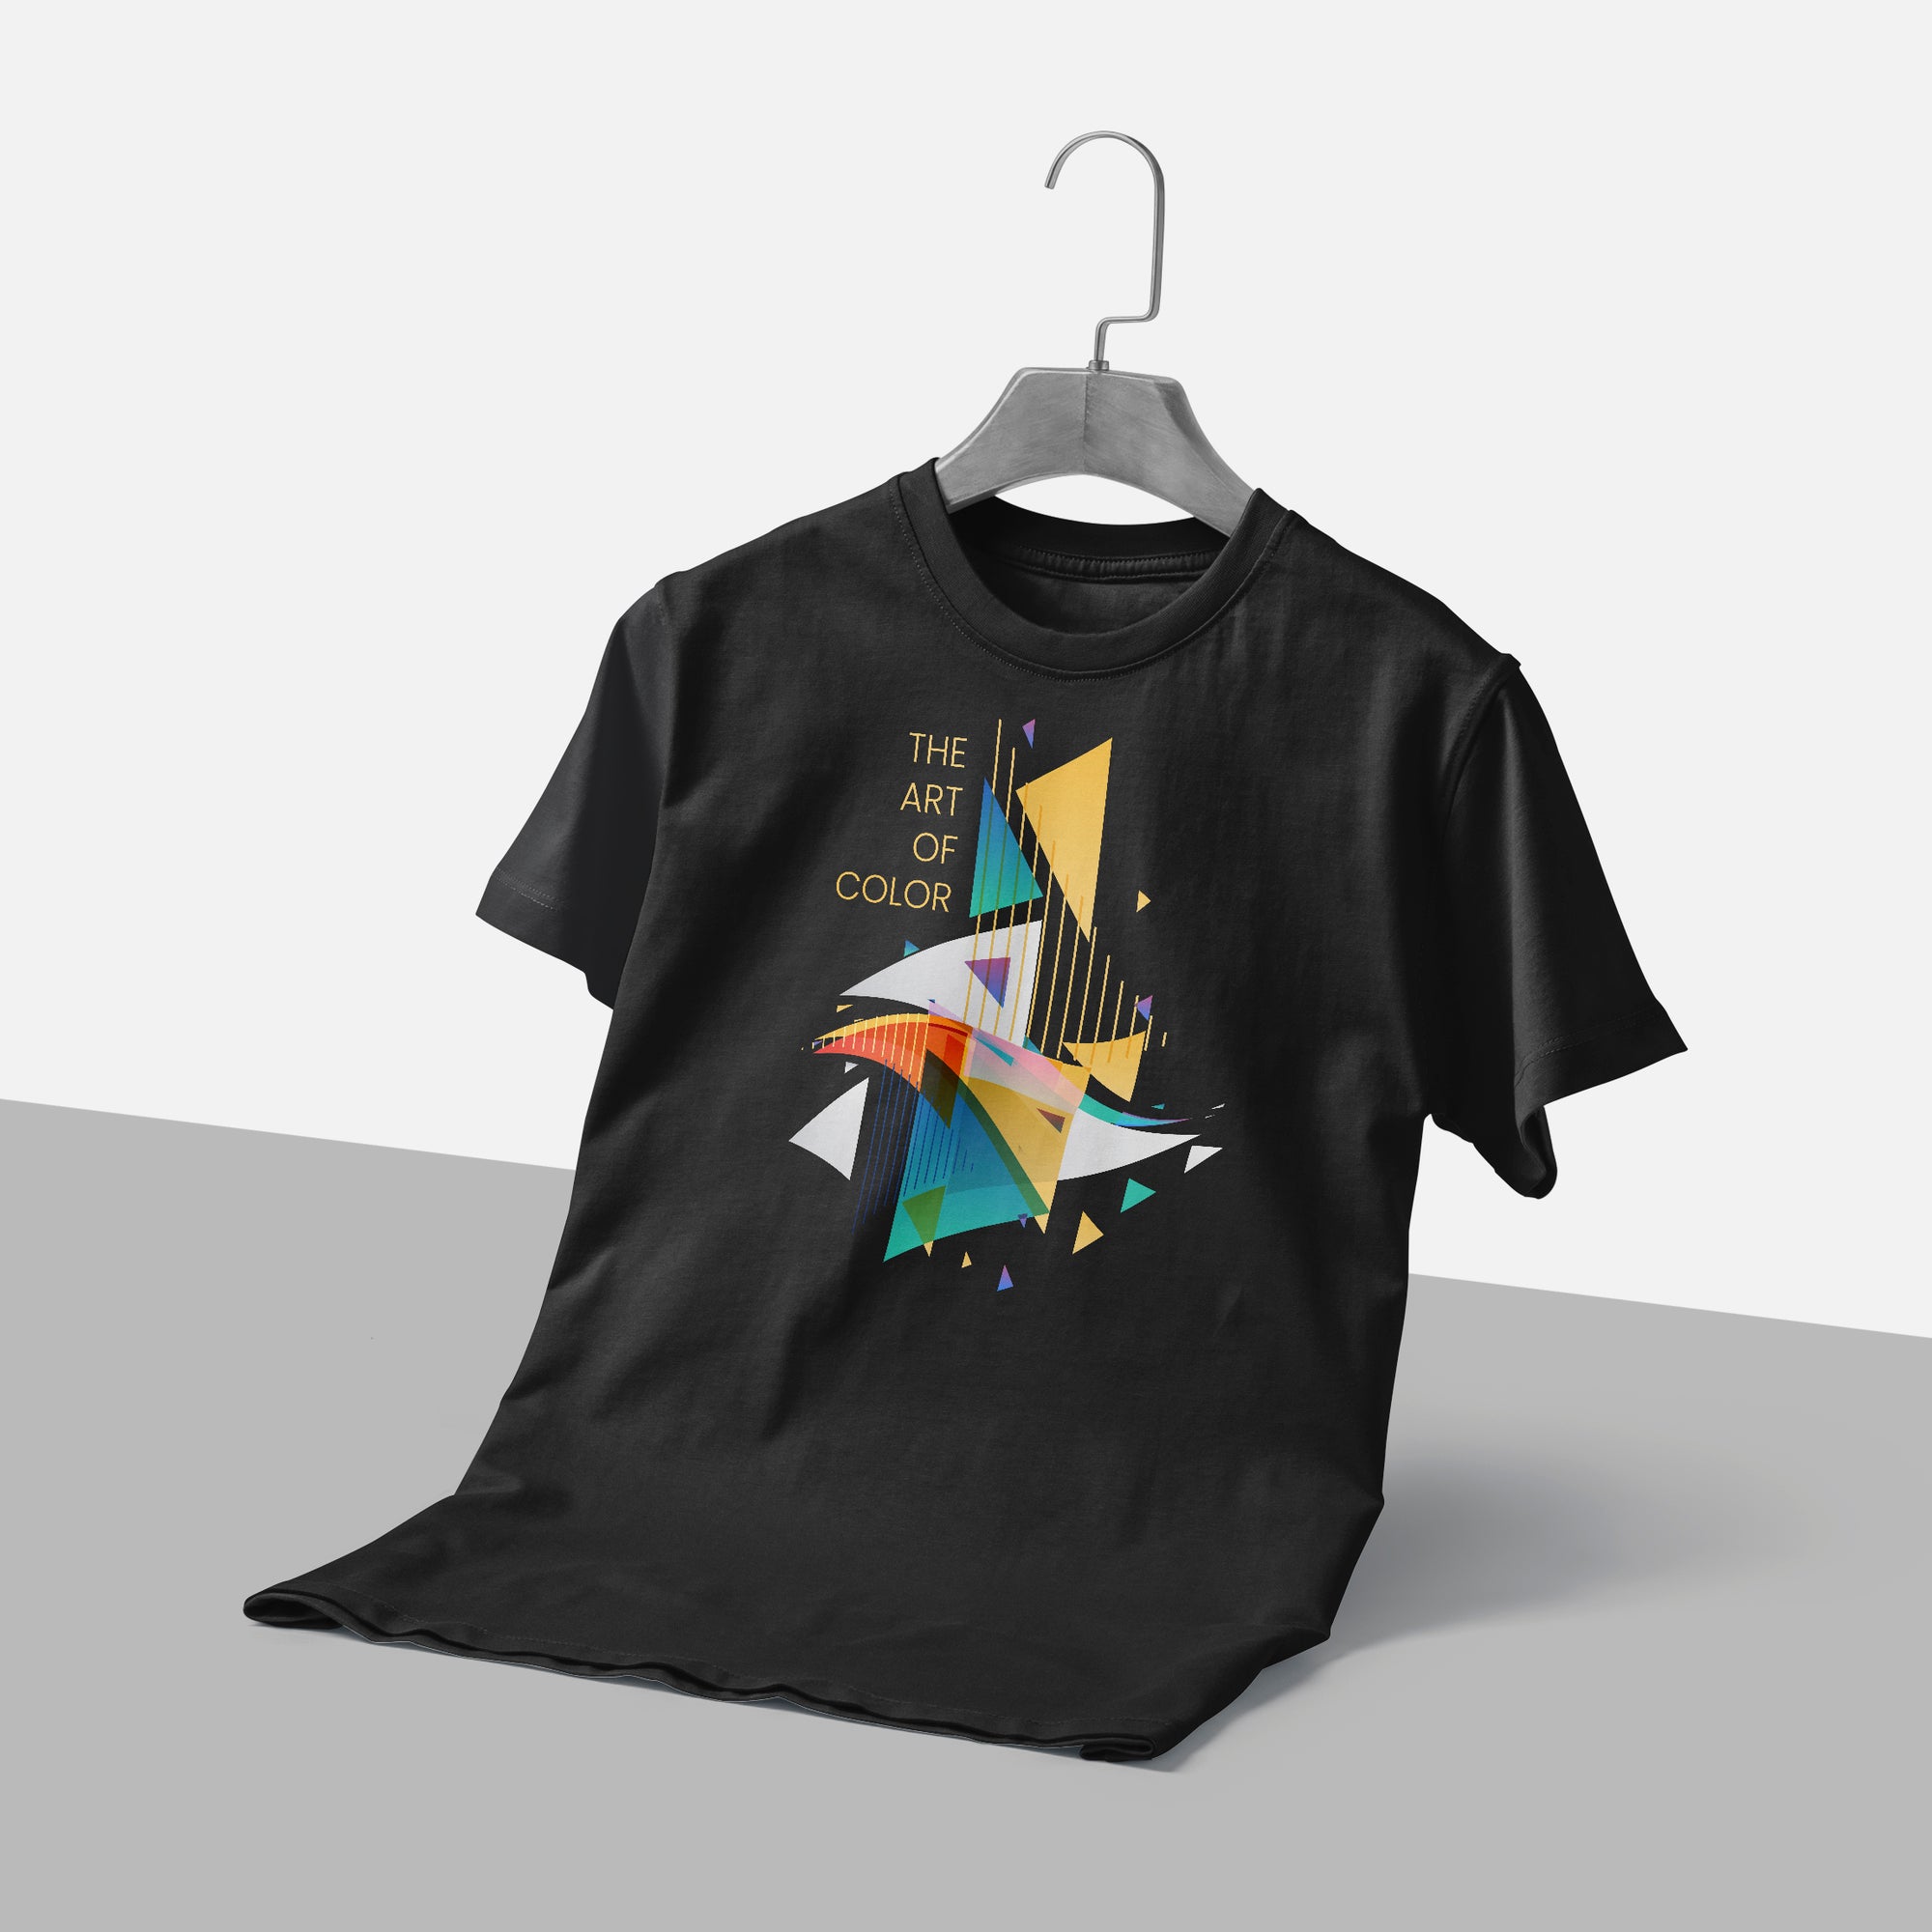 The Art of Color Abstract T-Shirt